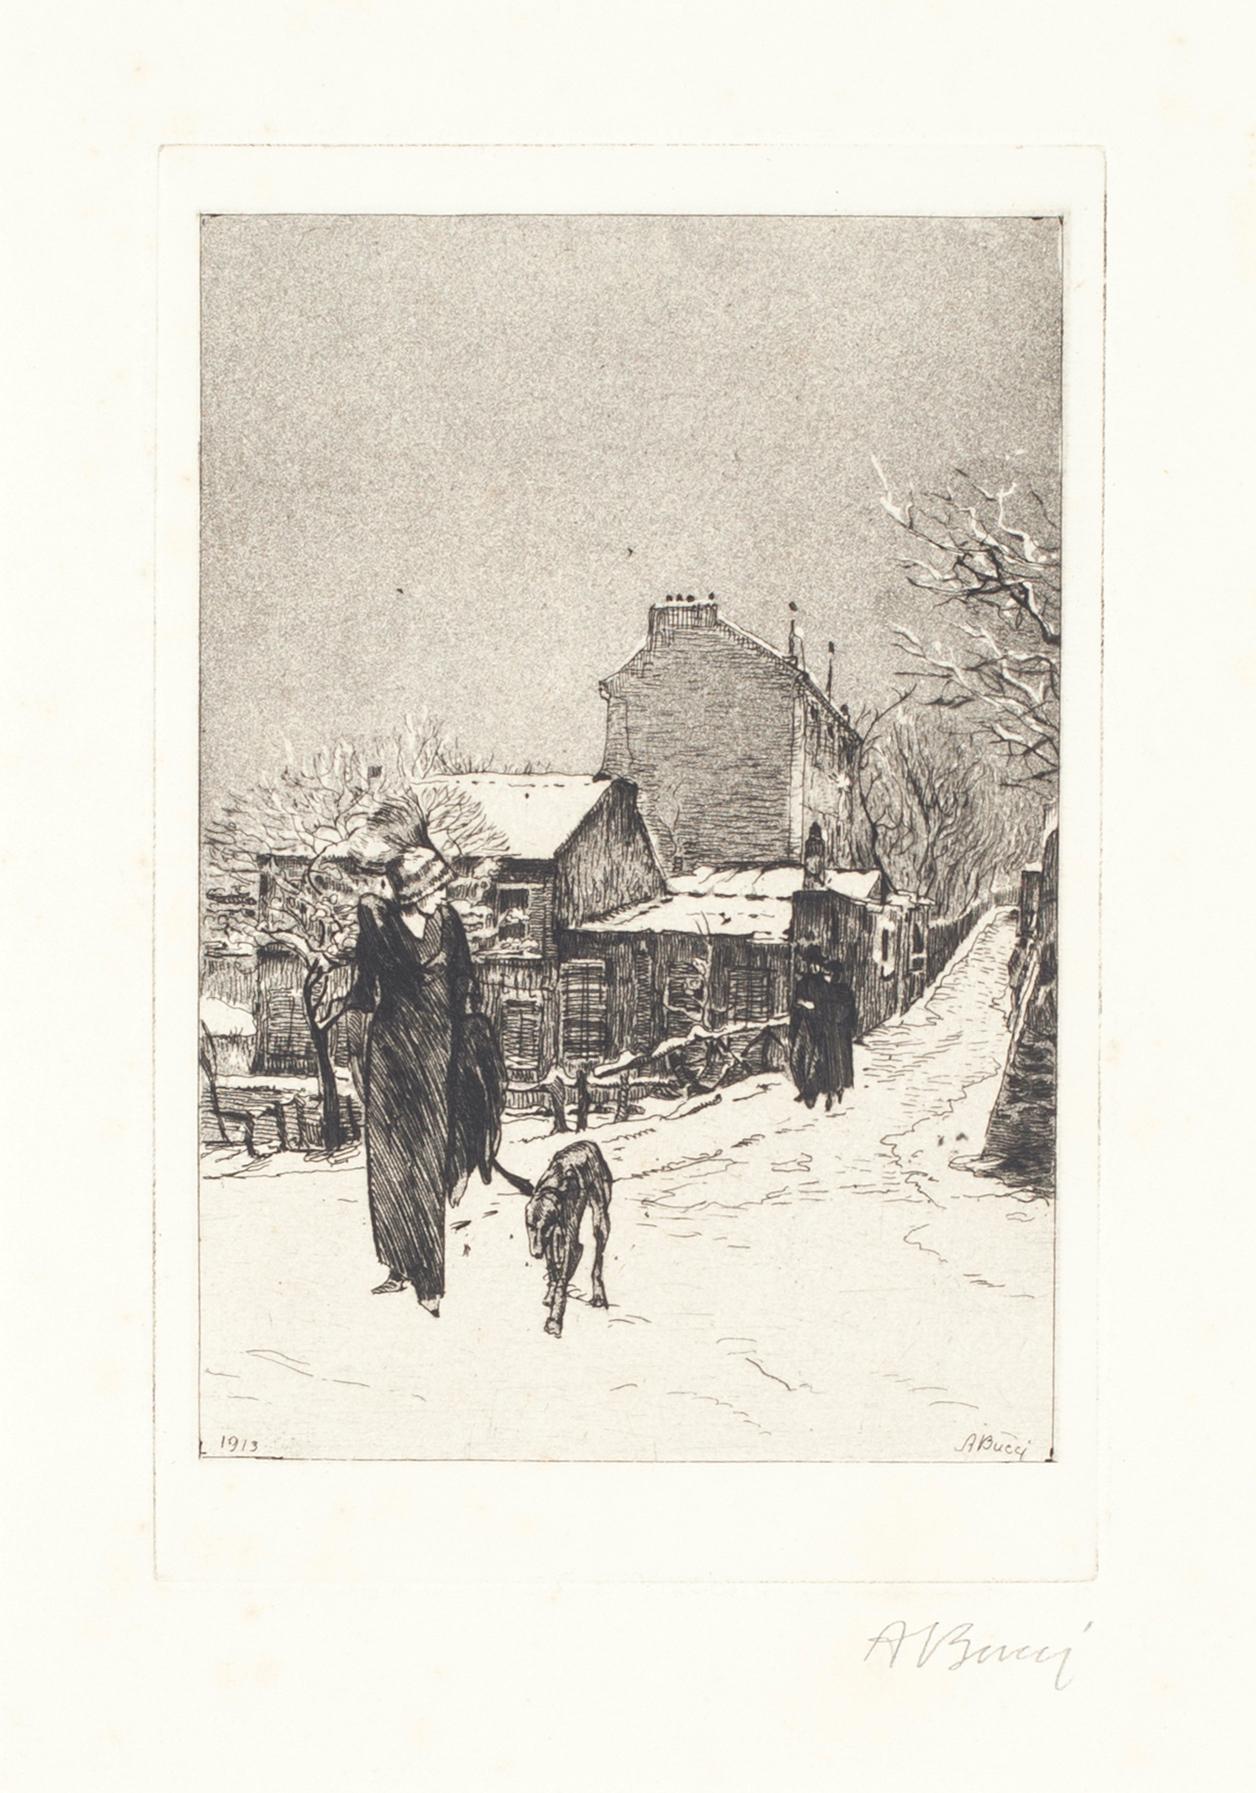 Under the Snow - Original Etching by Anselmo Bucci - 1913